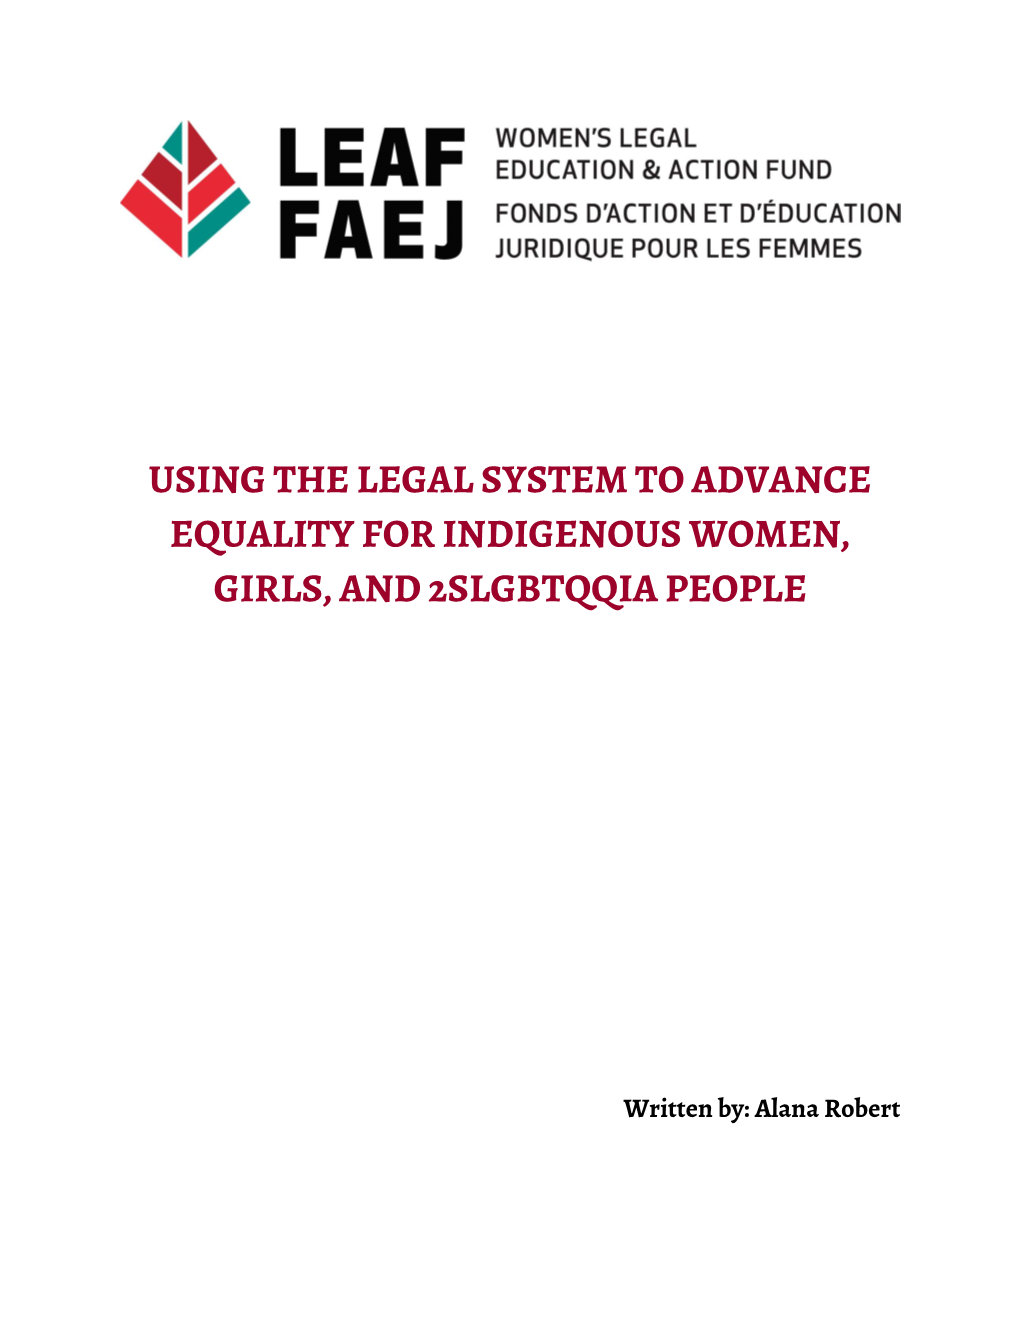 Using the Legal System to Advance Equality for Indigenous Women, Girls, and 2Slgbtqqia People